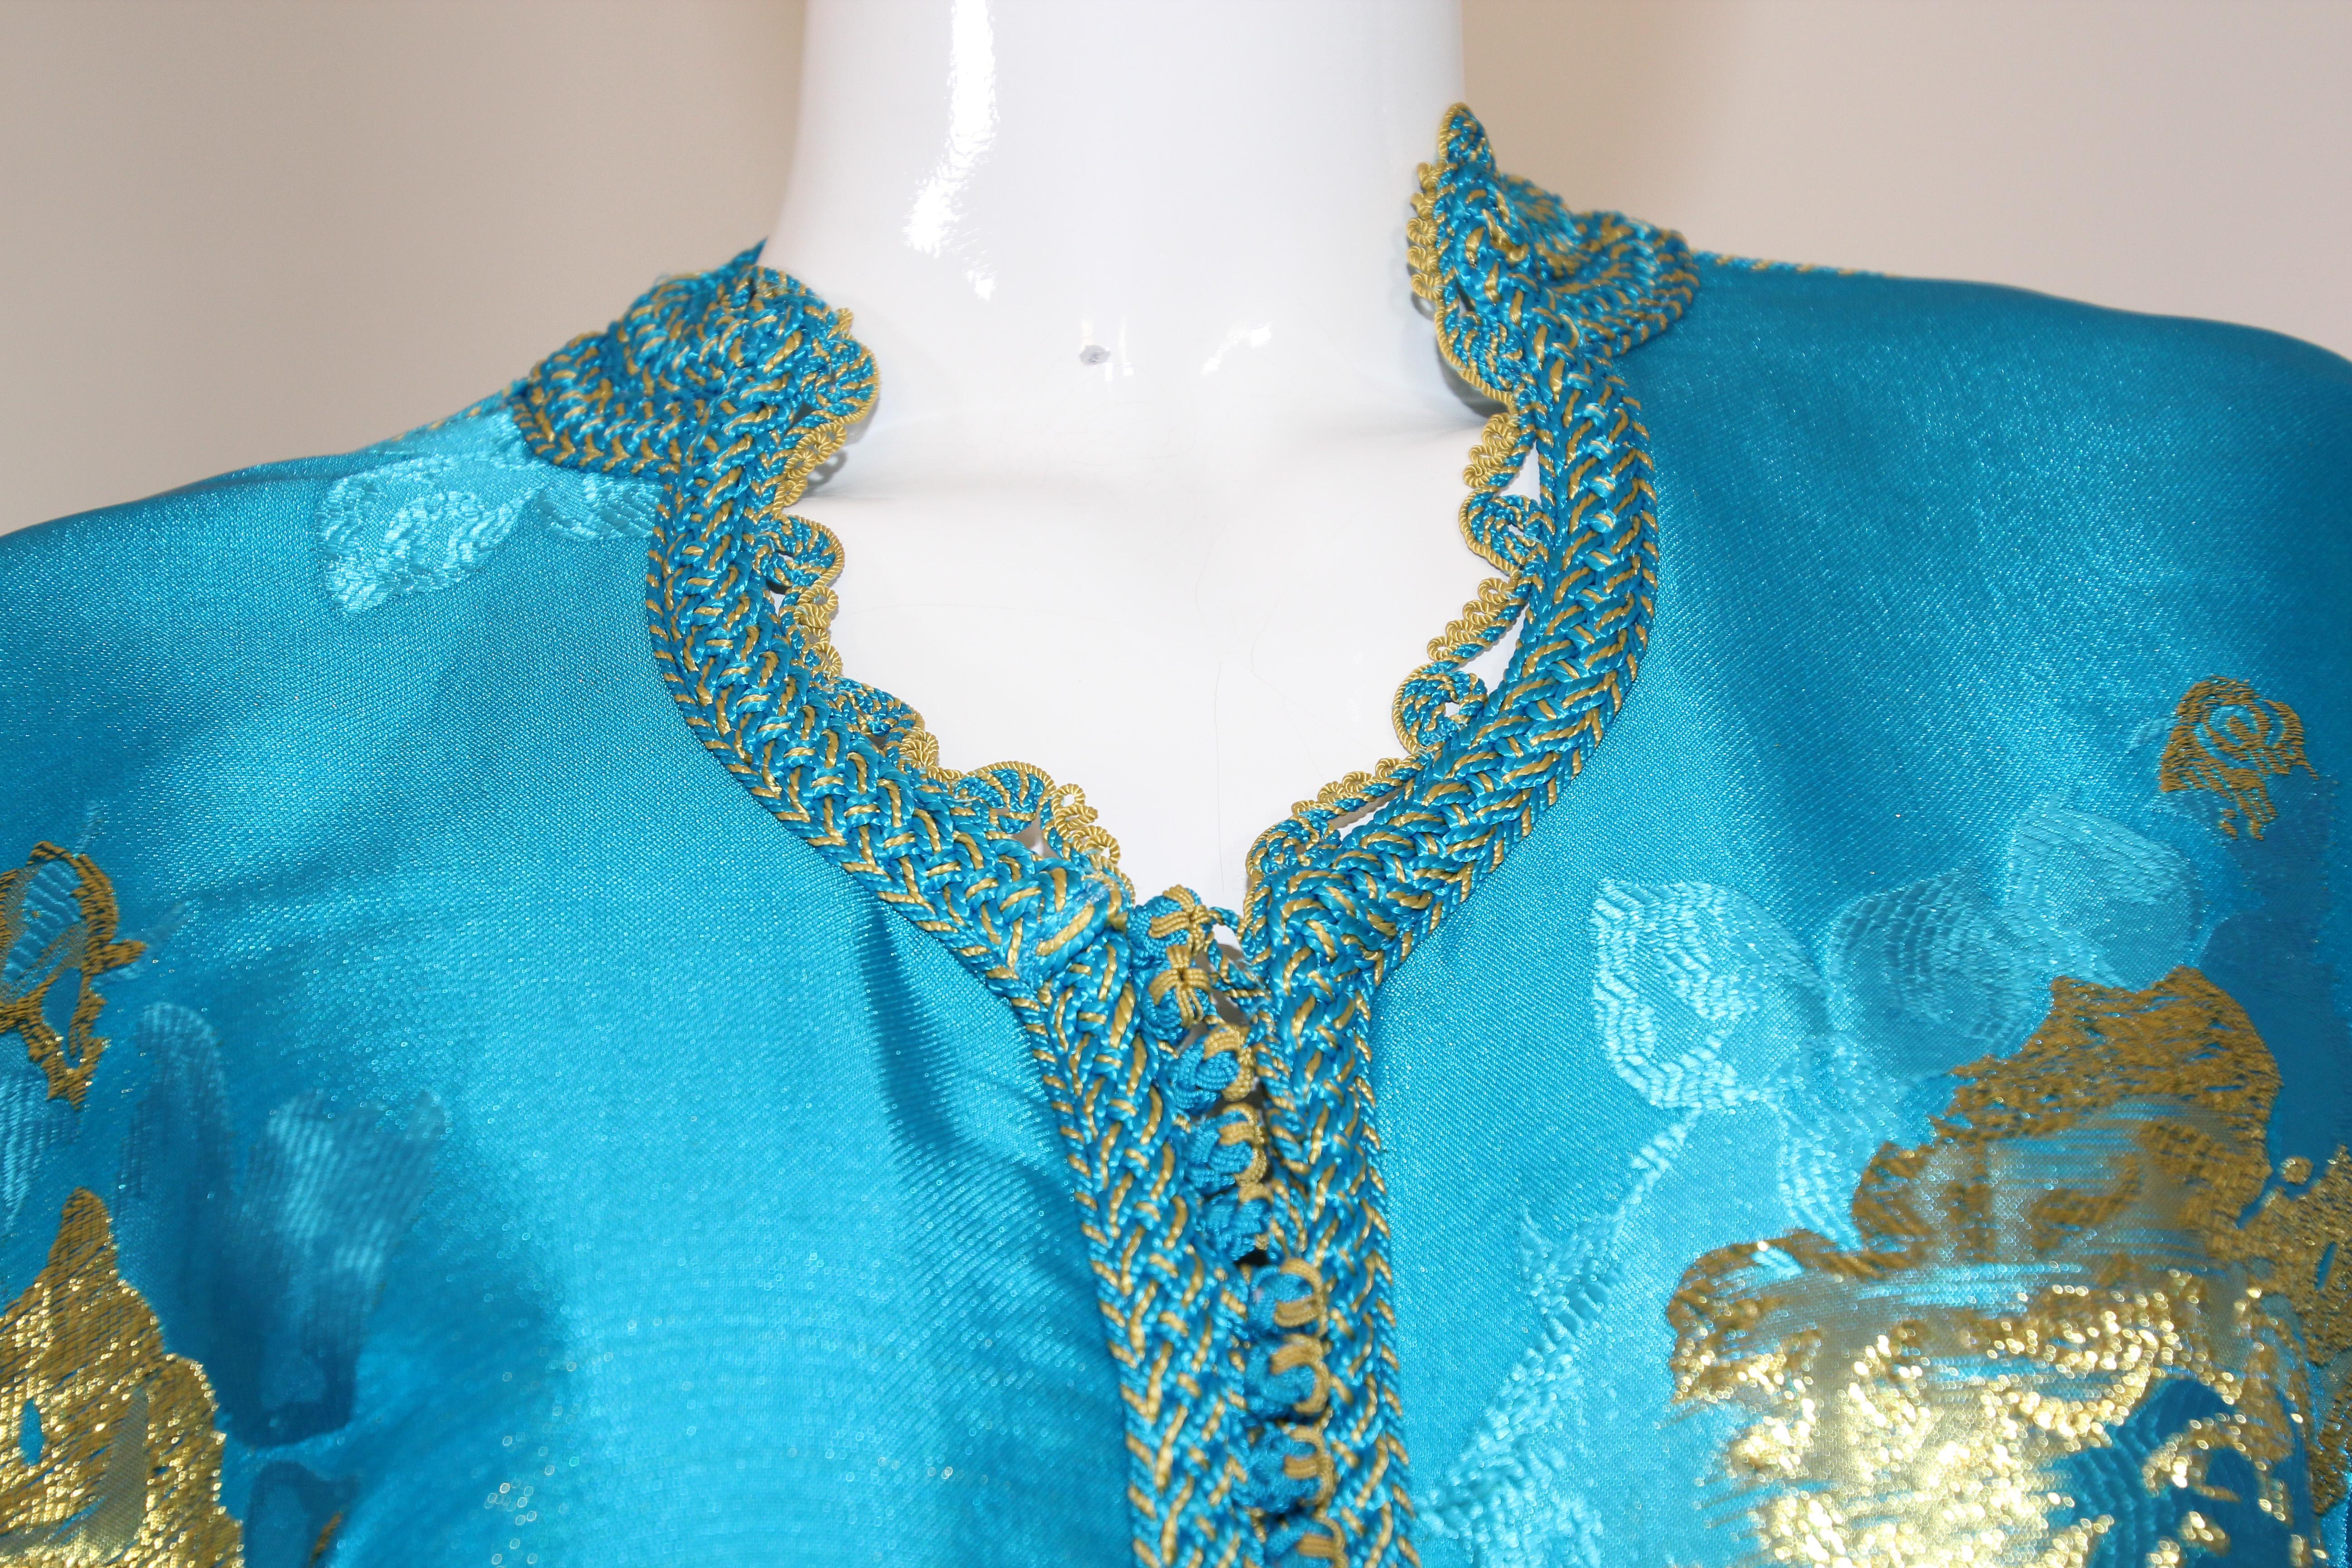 Moroccan Kaftan in Turquoise and Gold Floral Brocade Metallic Lame 11